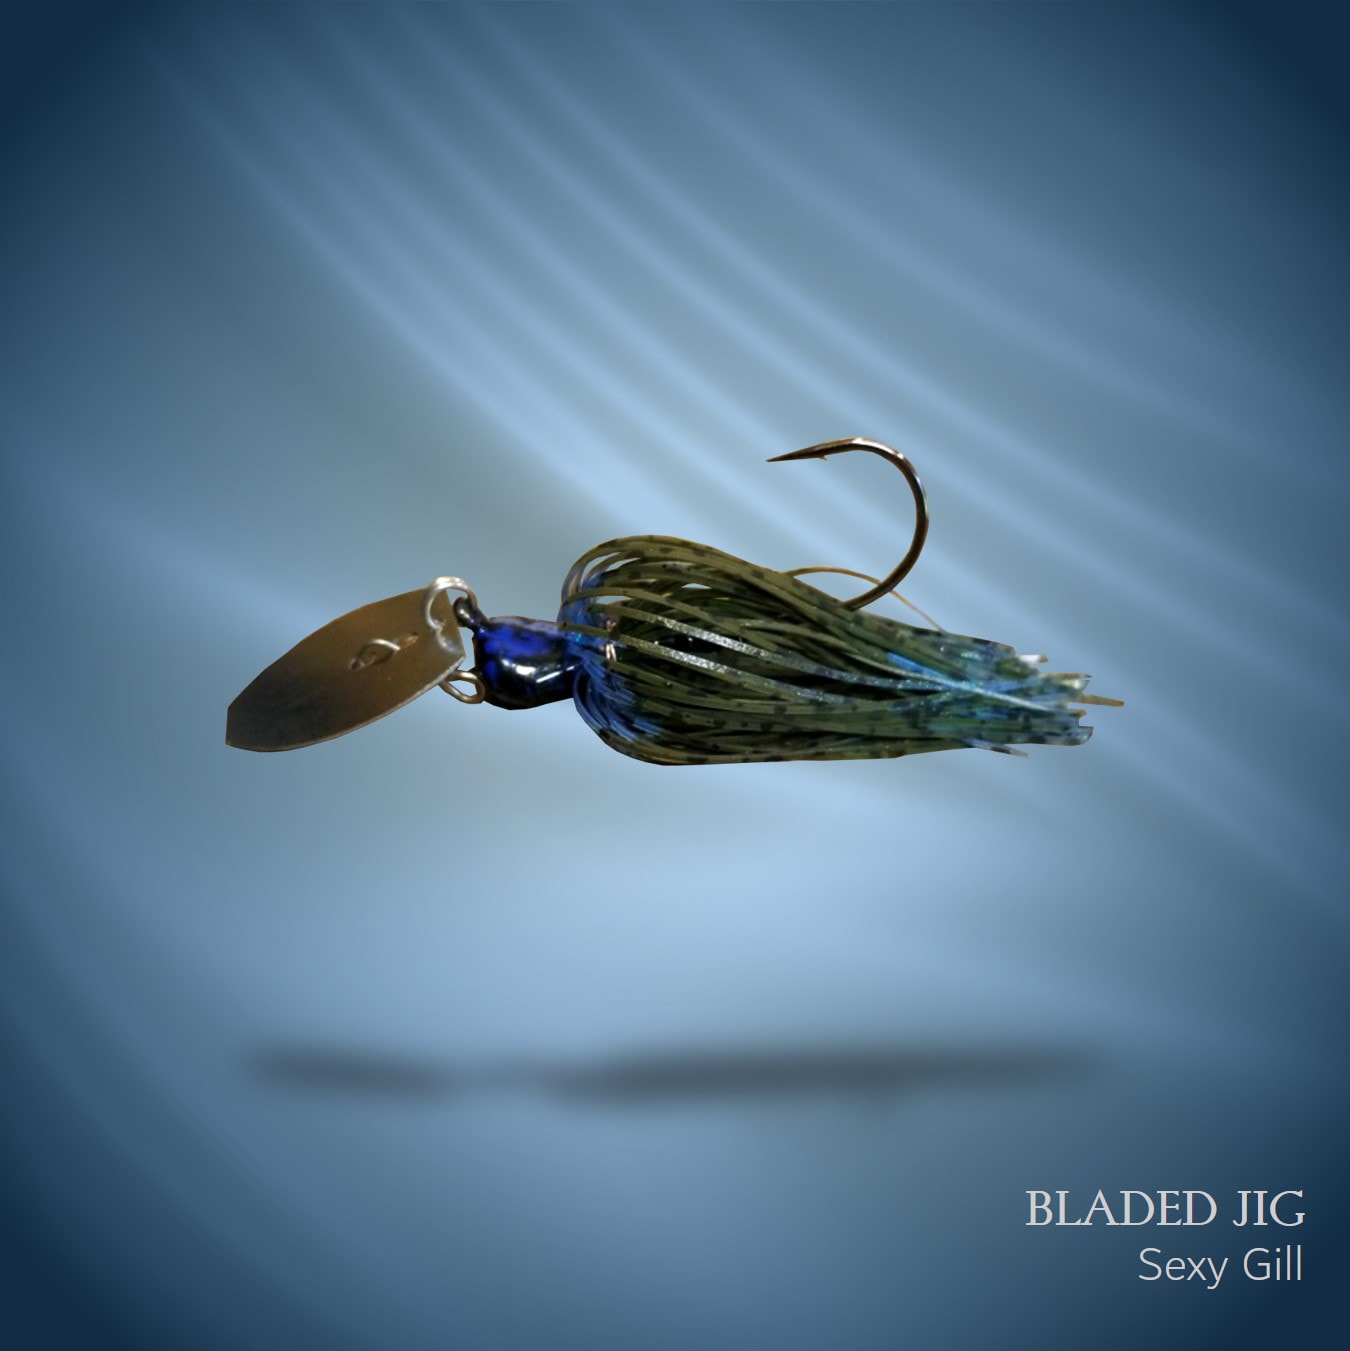 Bladed Jig - Sexy Gill